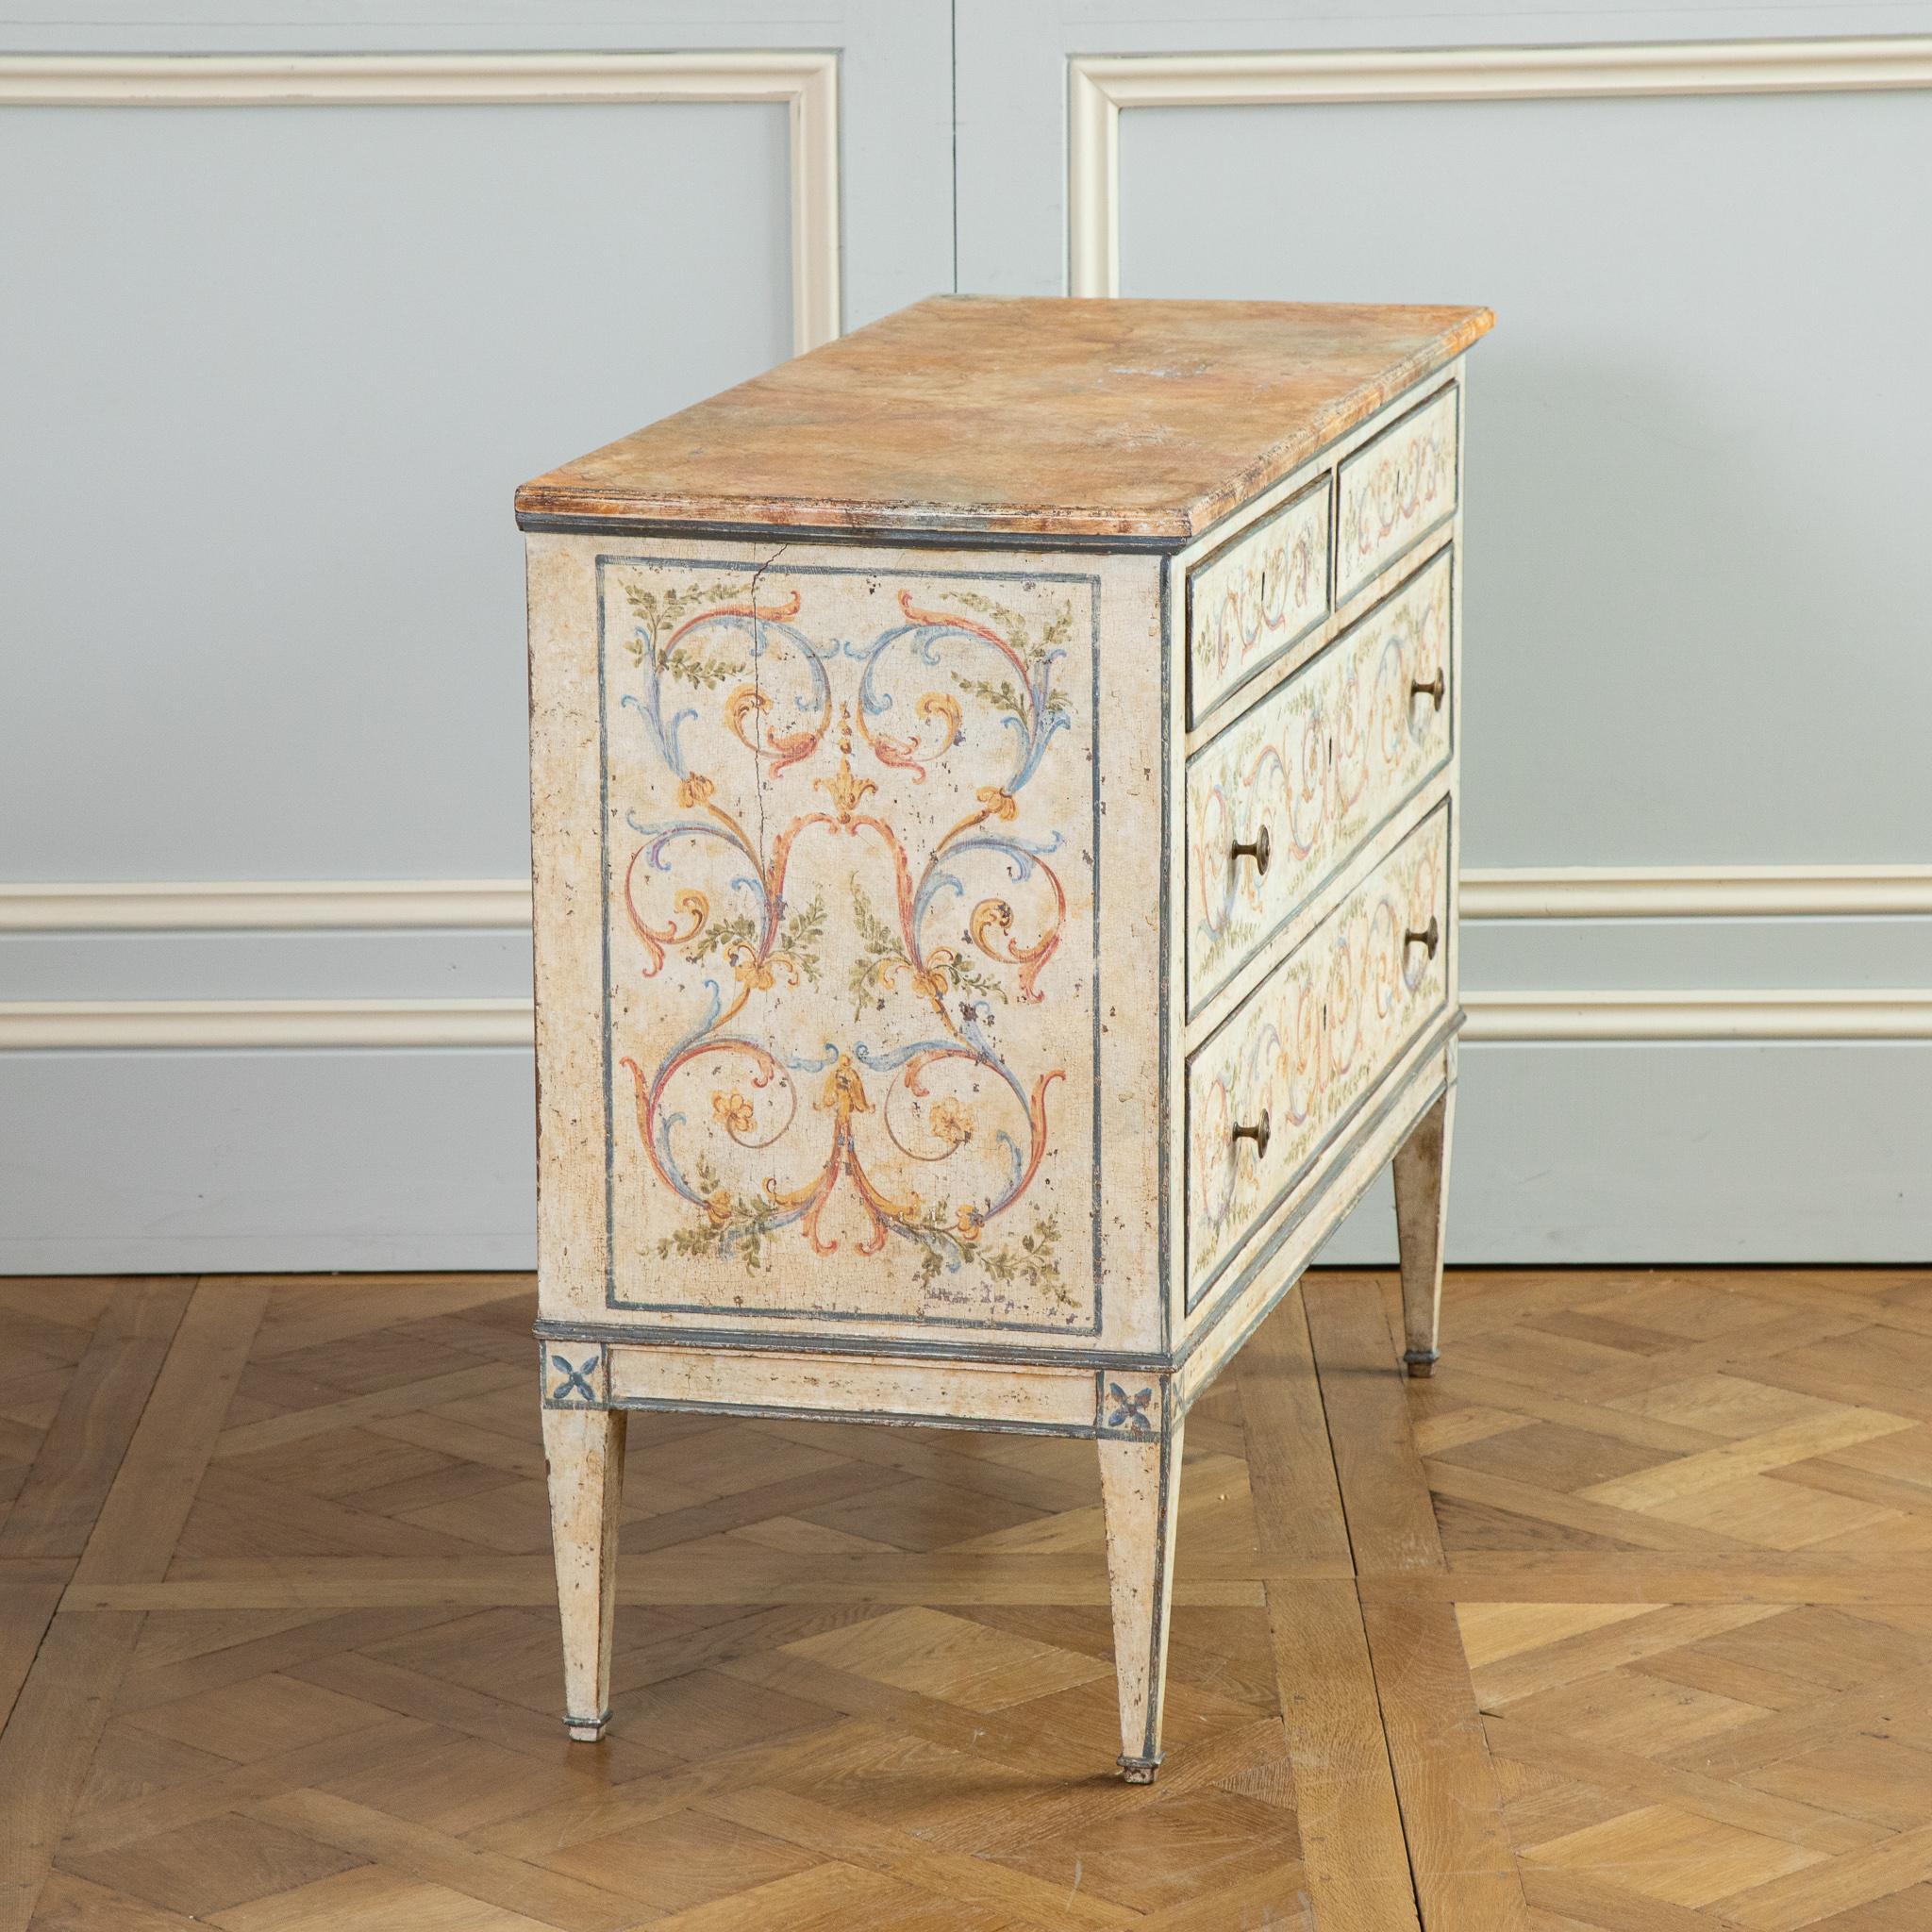 19th Century Venetian Neoclassical style Hand Painted Commode In Good Condition For Sale In London, Park Royal